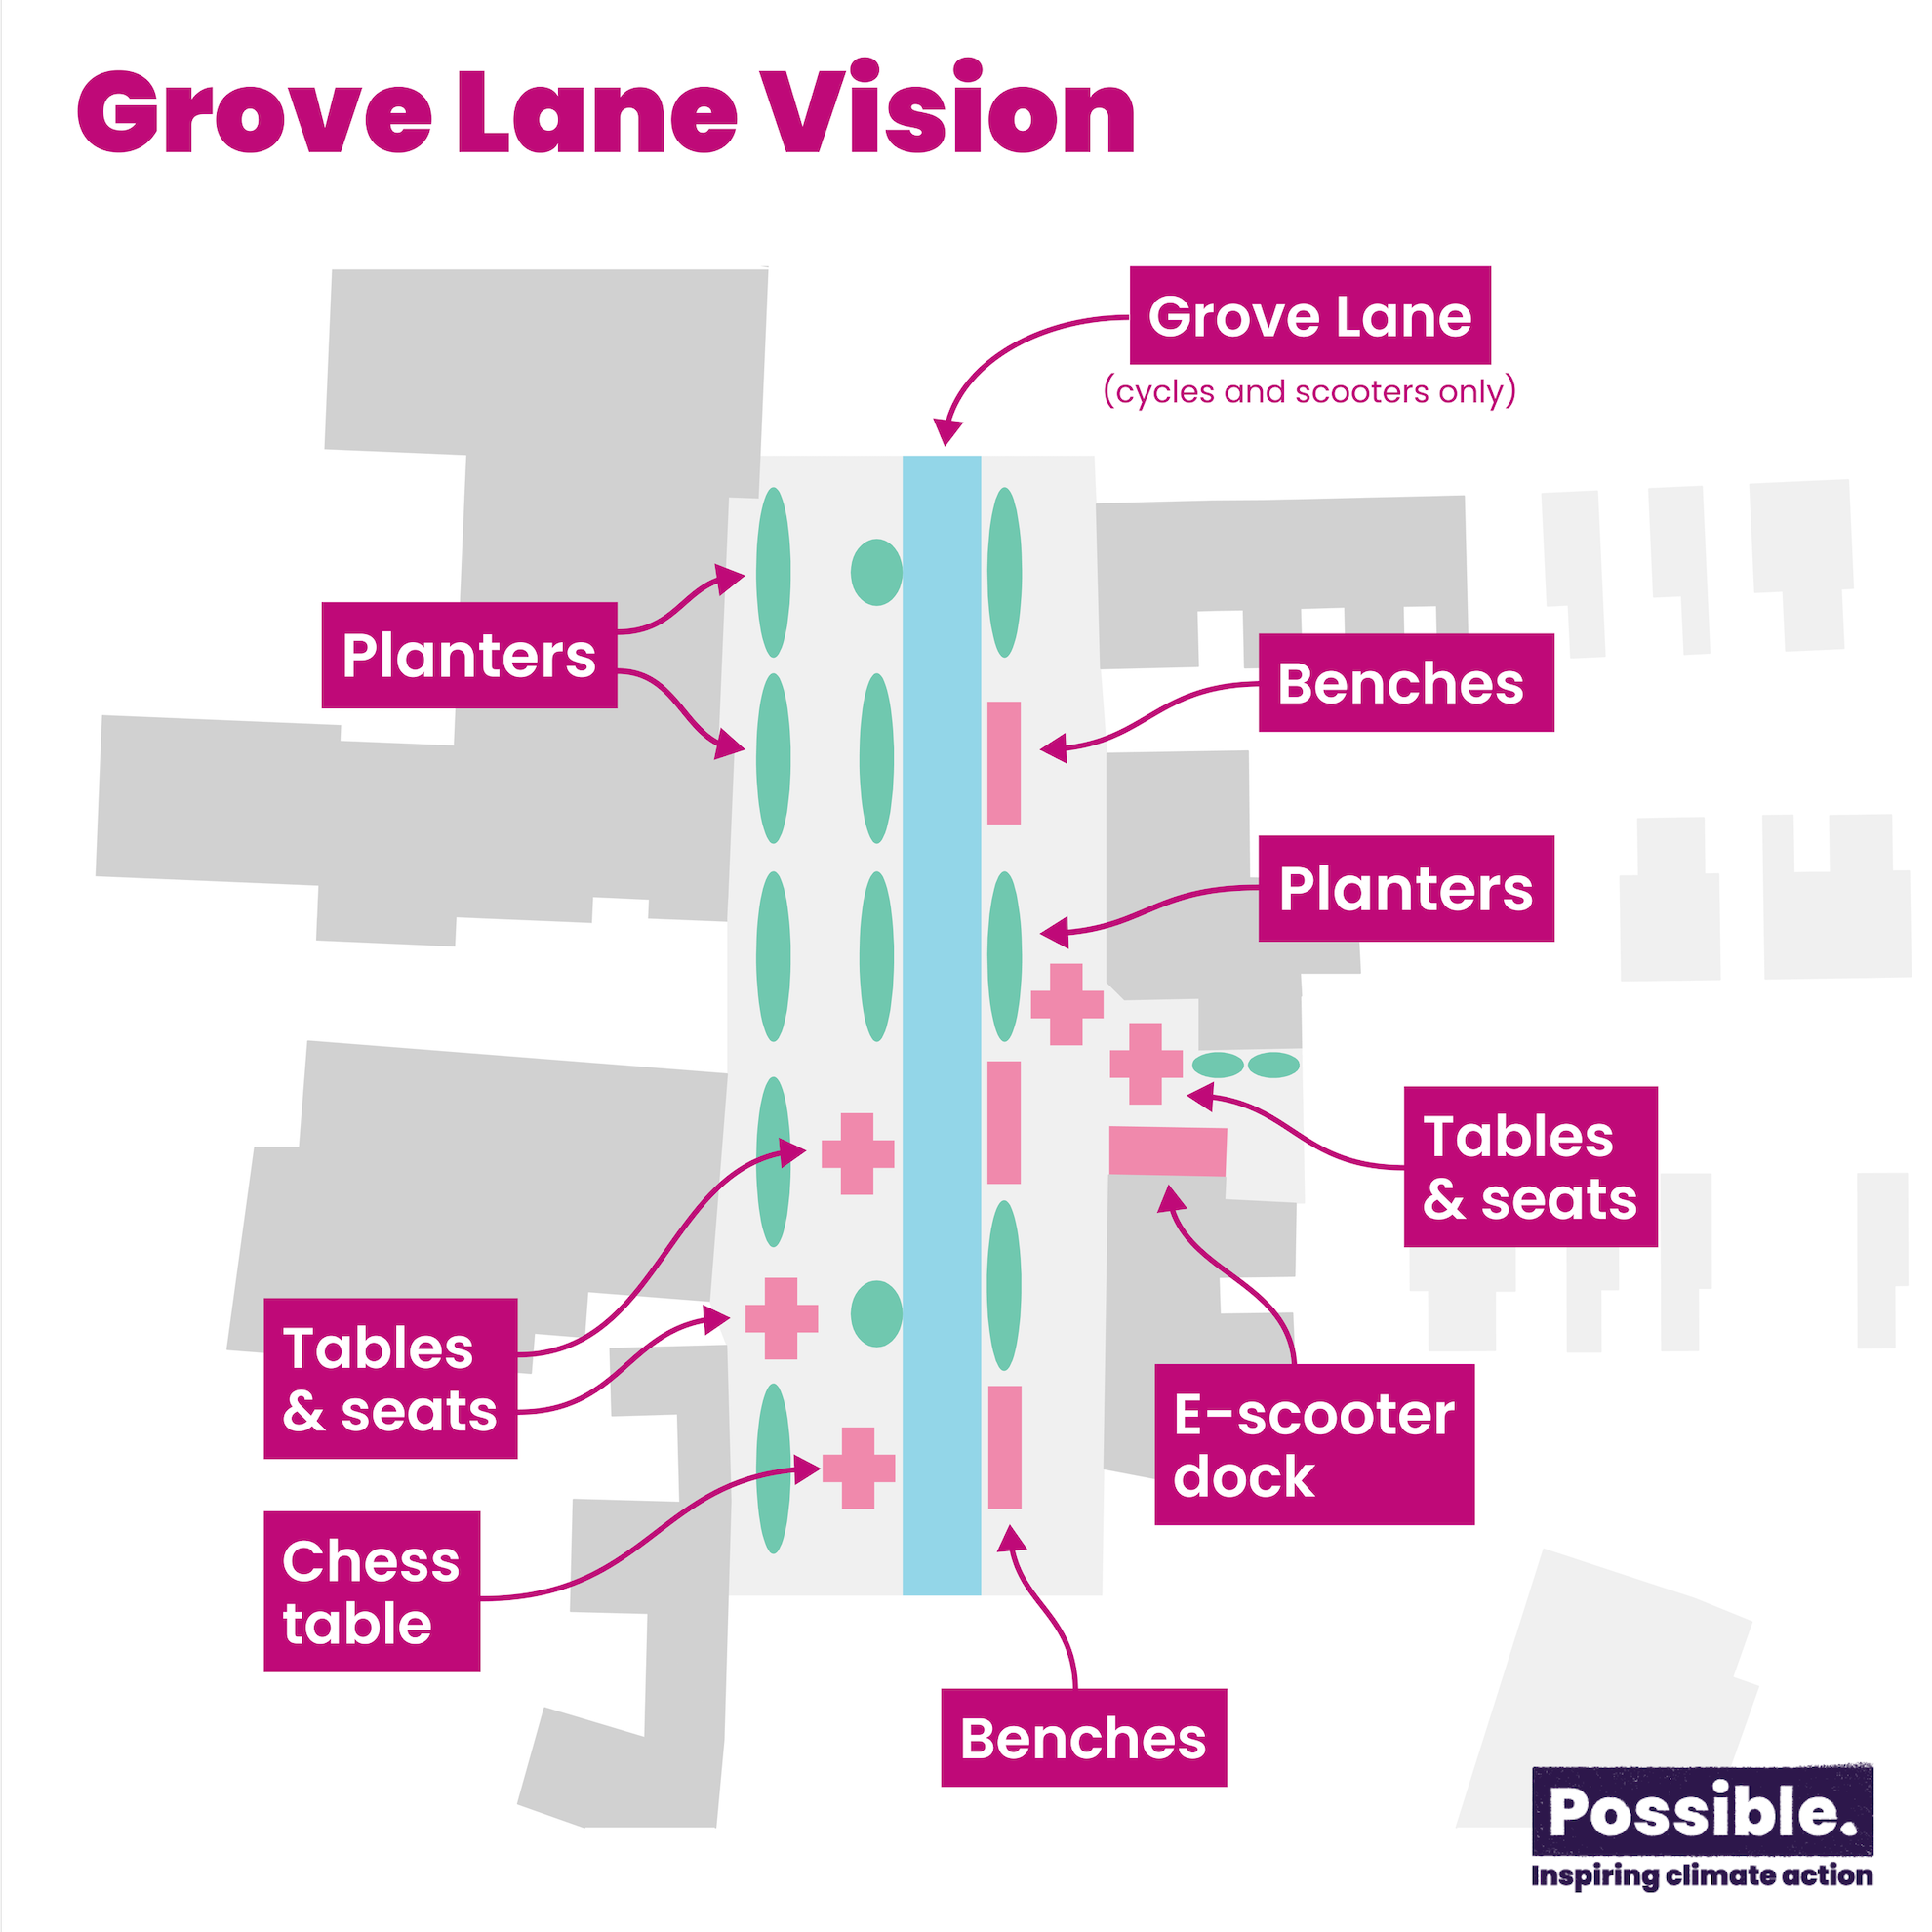 Illustrated vision of Grove Lane without cars